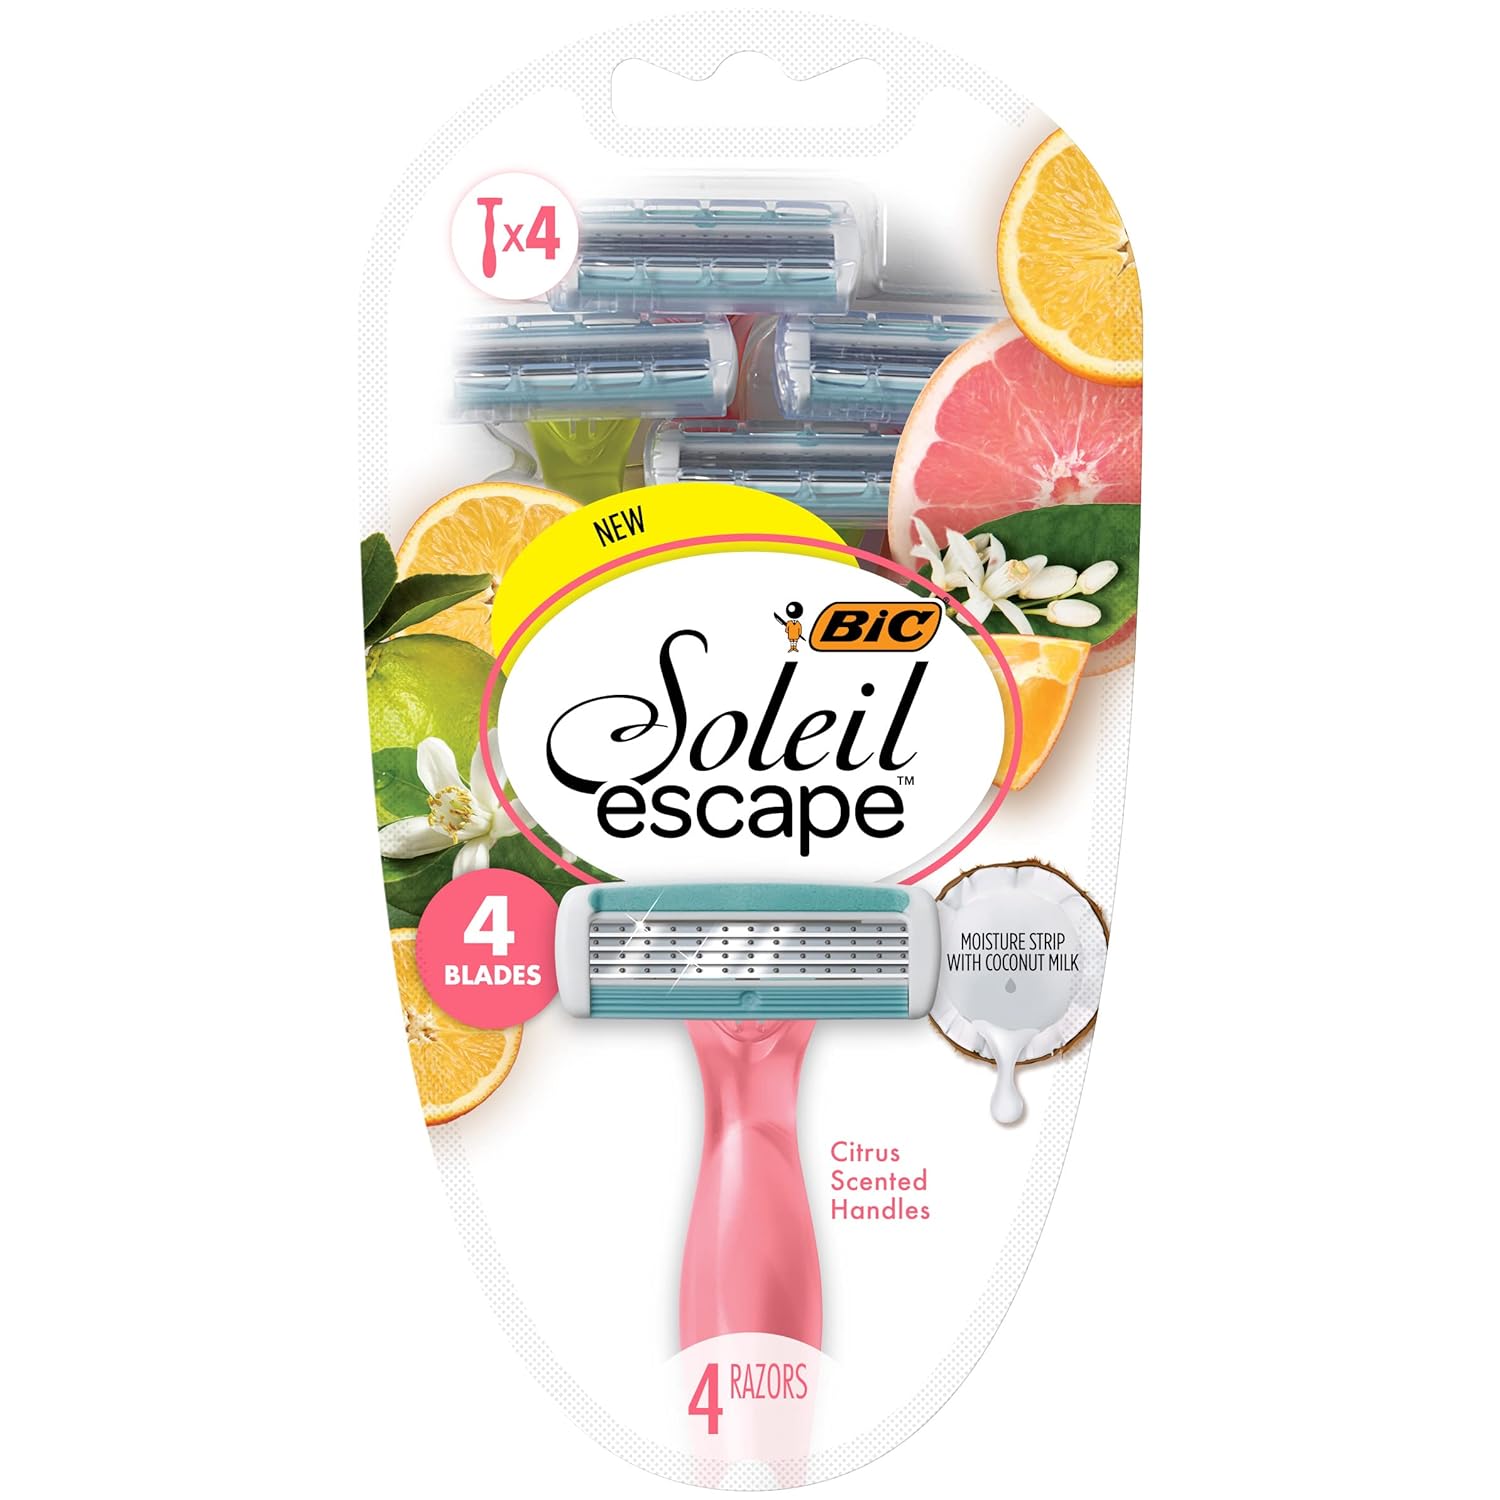 BIC Soleil Escape Women's Disposable Razors With 4 Blades for a Sensorial Experience and Comfortable Shave, Pack of Citrus Scented Handle Shaving Razors for Women, 4 Count